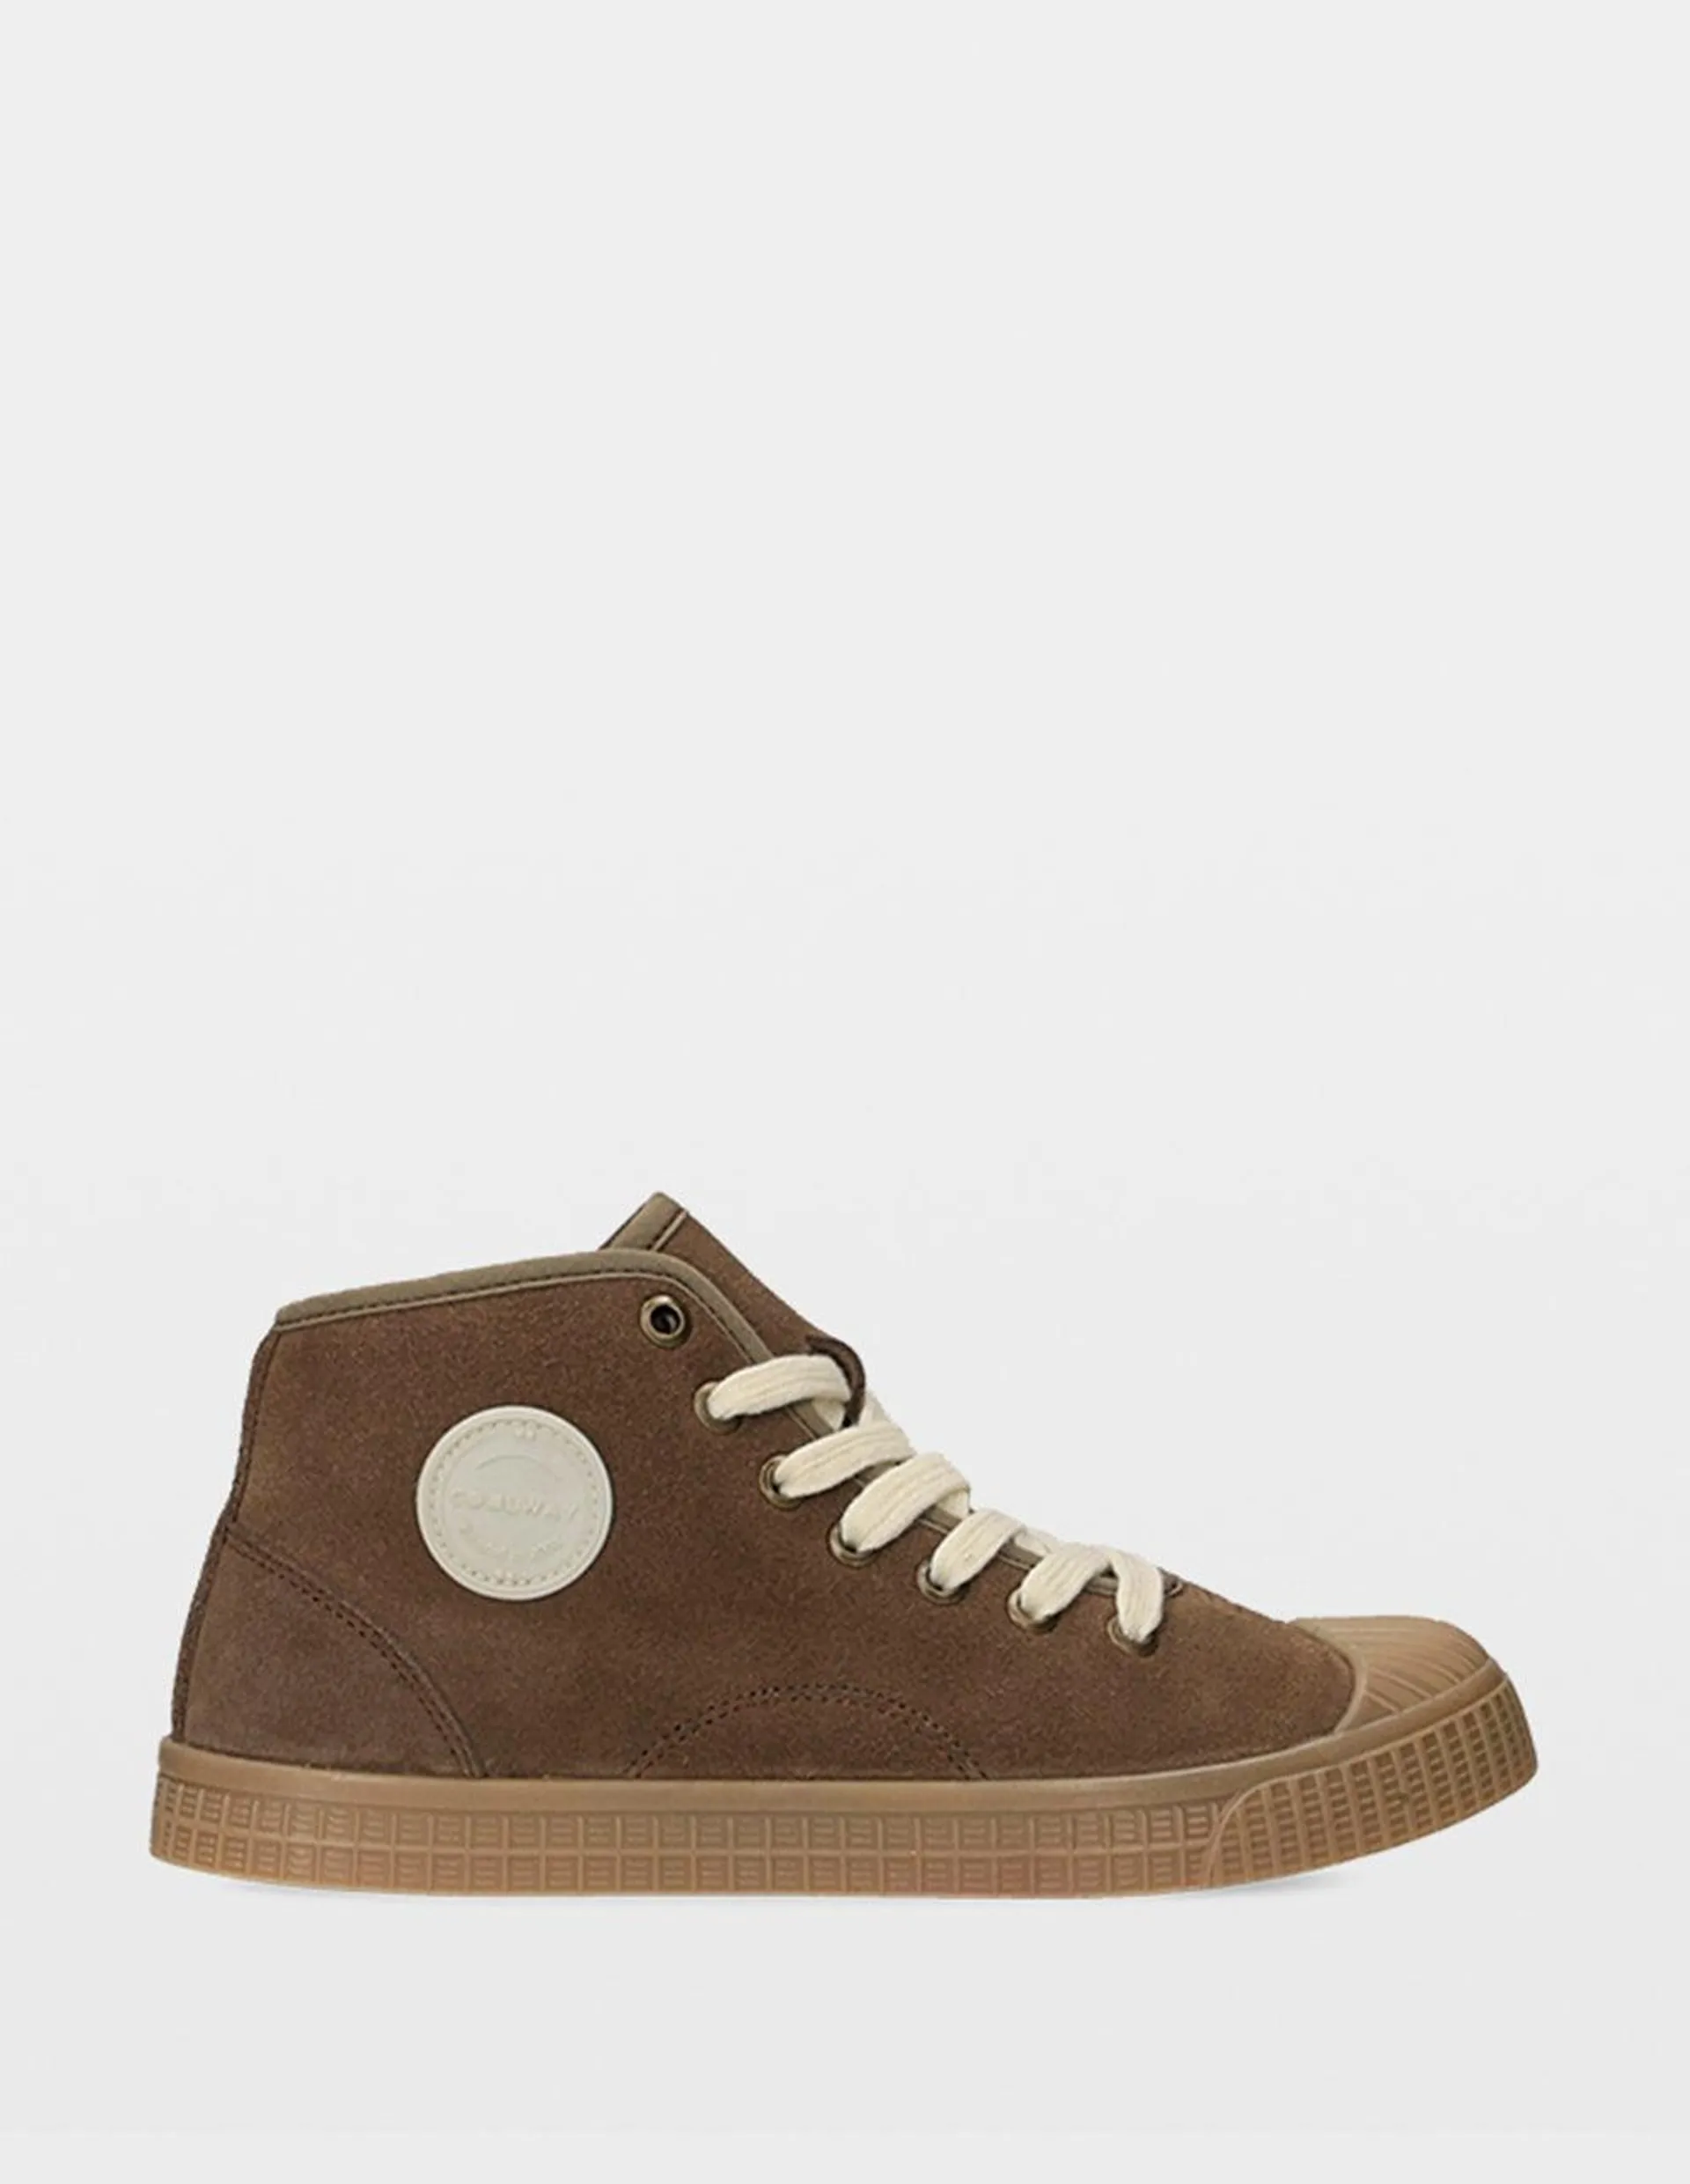 GREENHI BROWN LEATHER MUJER